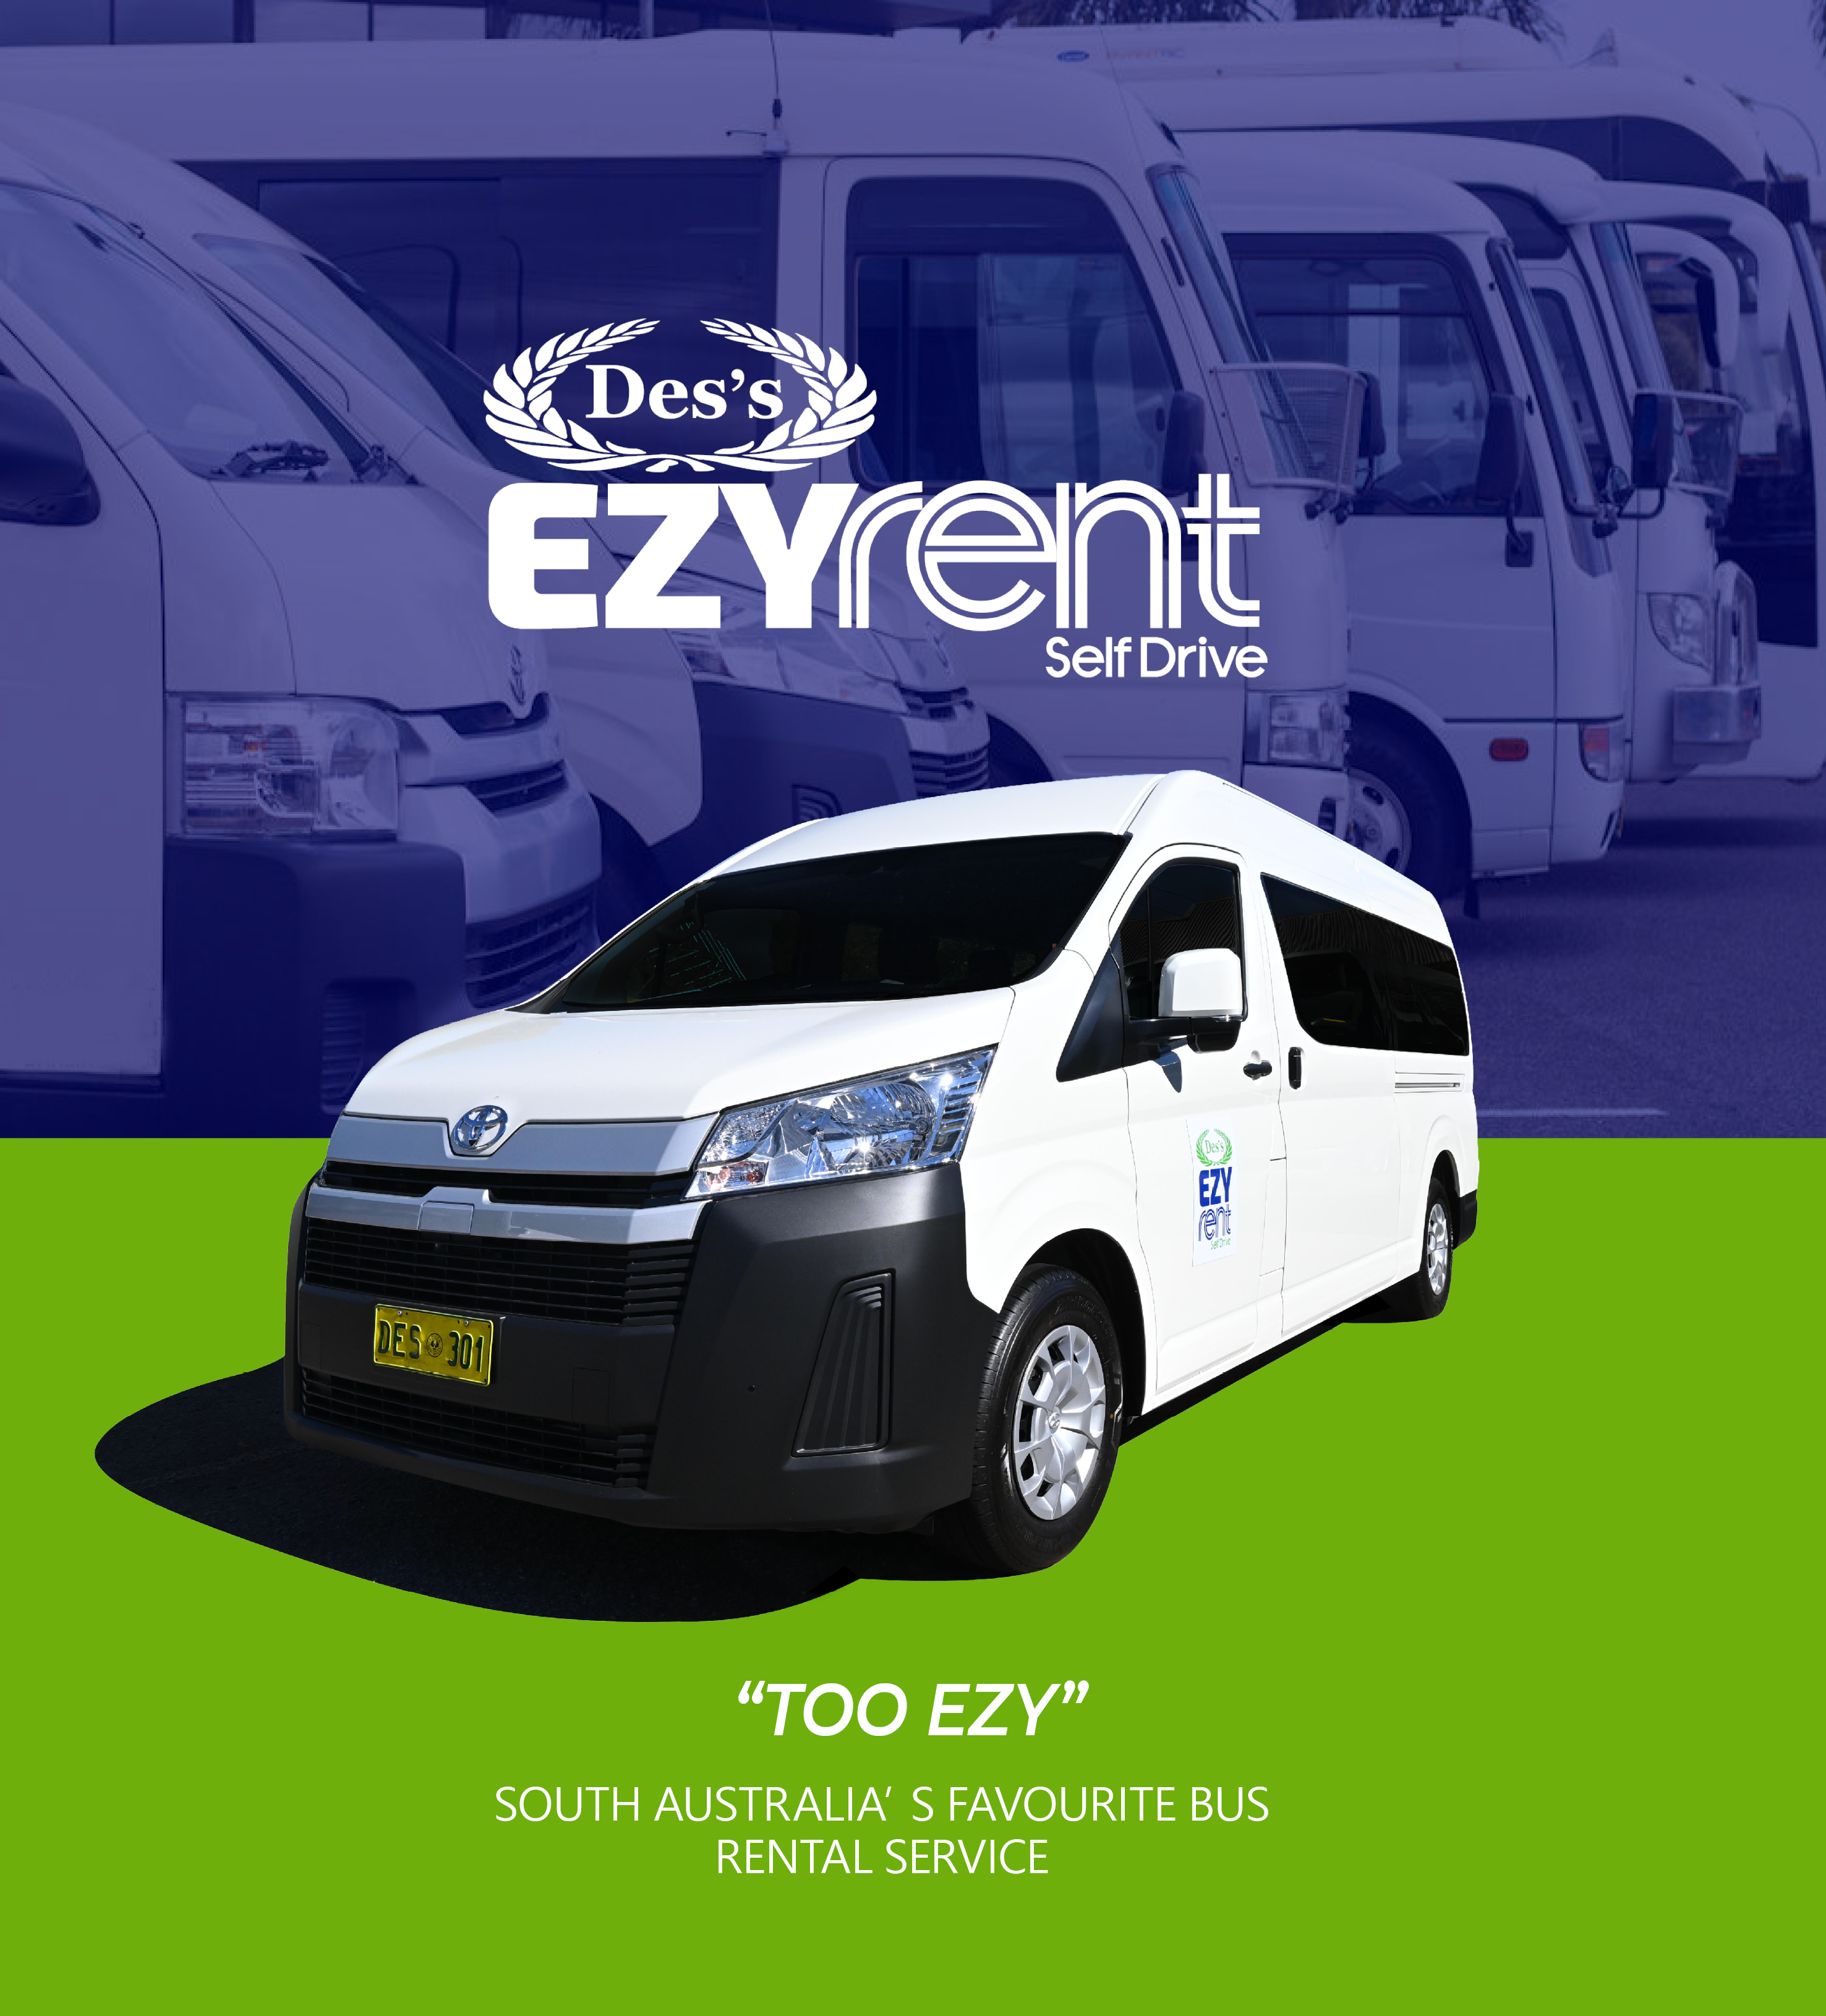 You’ll be blown away by how easy it is to book in your self-drive bus hire with our friendly and knowledgeable booking agents.